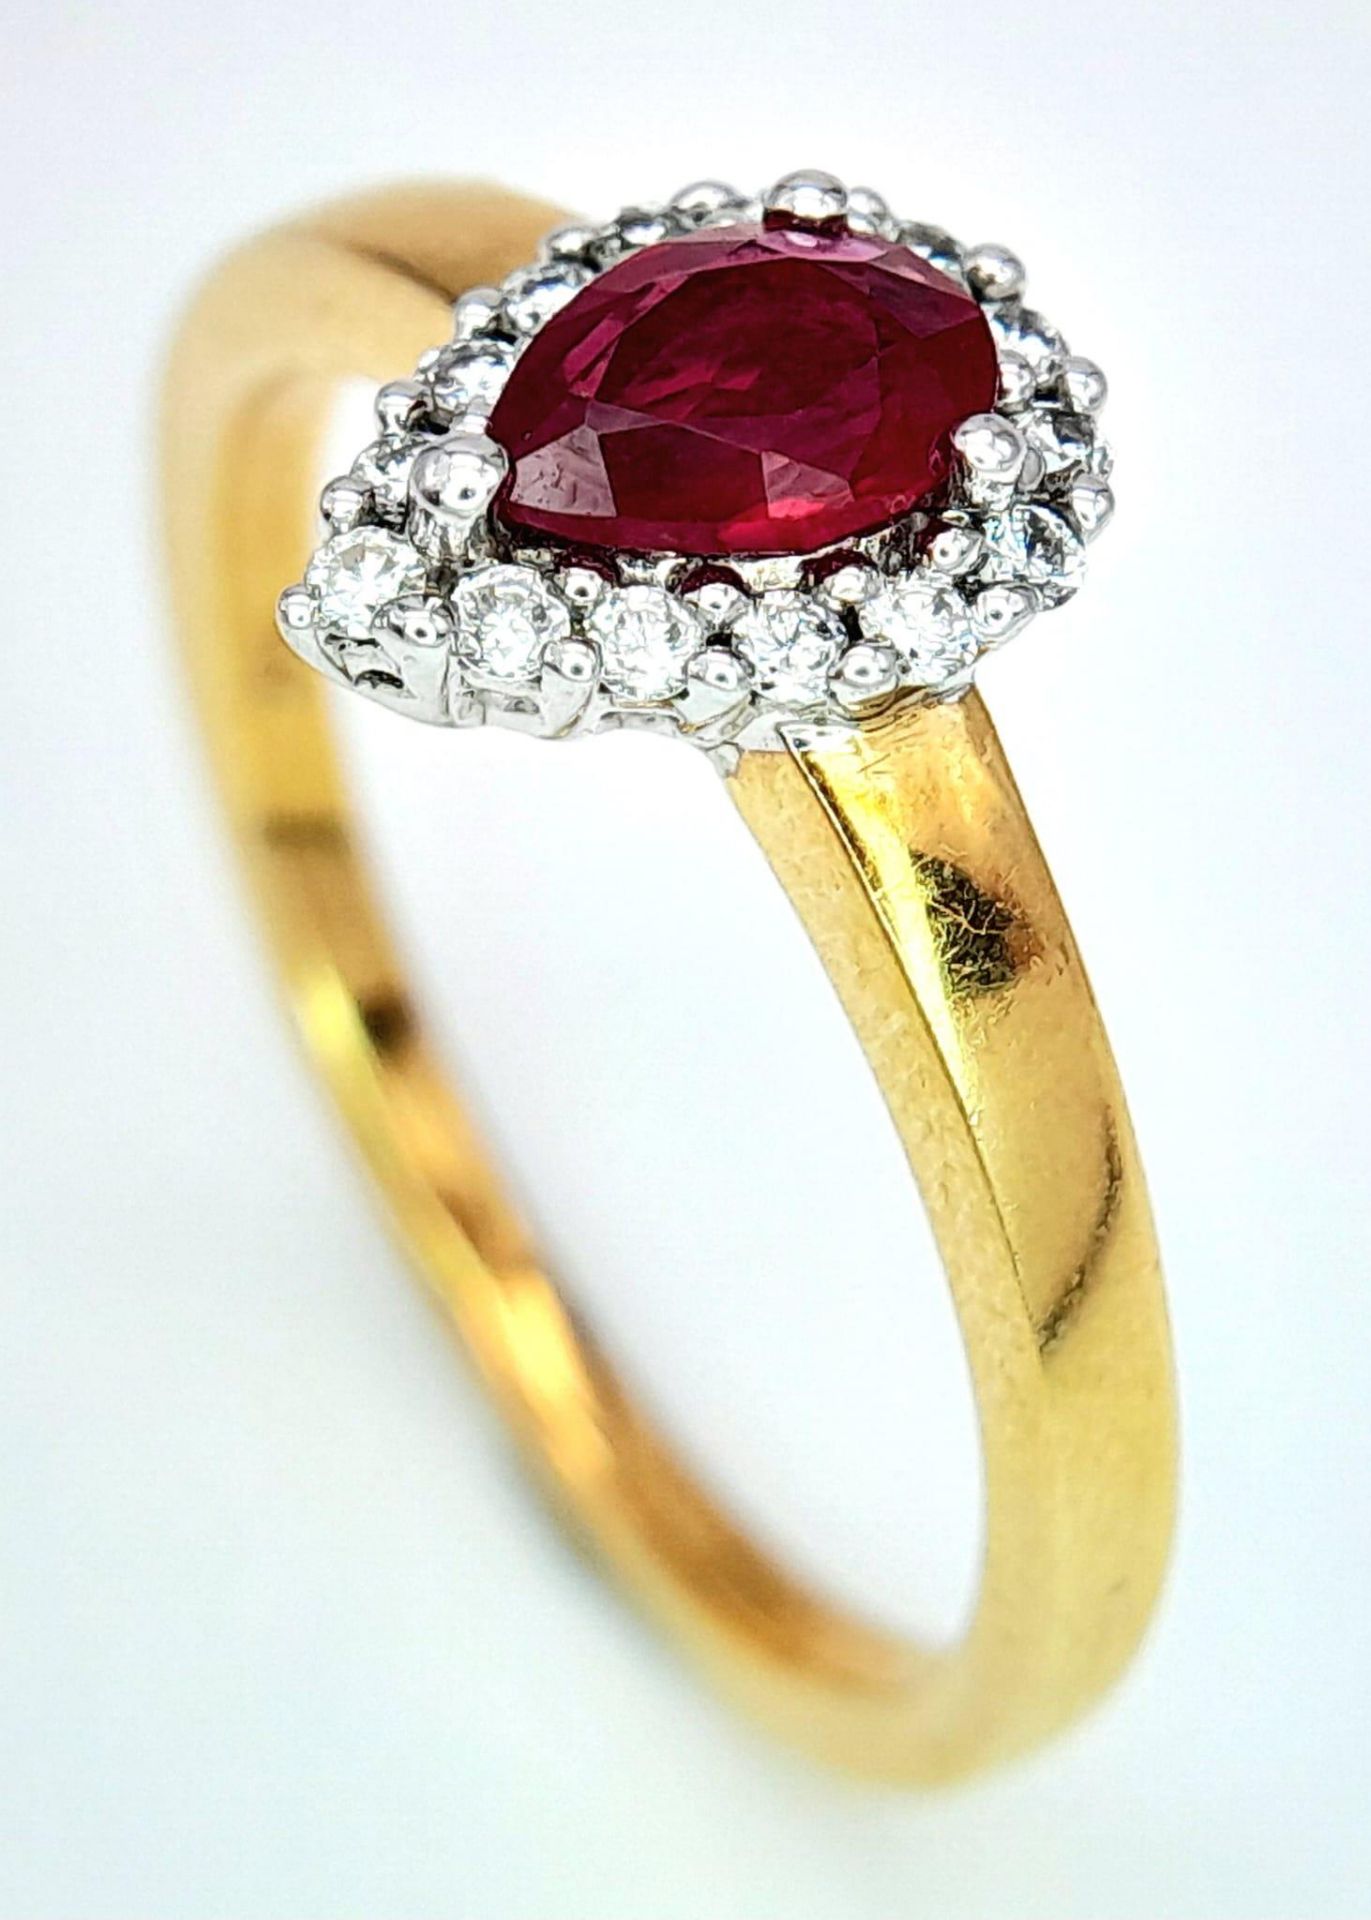 AN 18K YELLOW GOLD DIAMOND & RUBY PEAR SHAPE RING. 0.50CT PEAR SHAPED RUBY WITH DIAMOND SURROUND. - Image 2 of 6